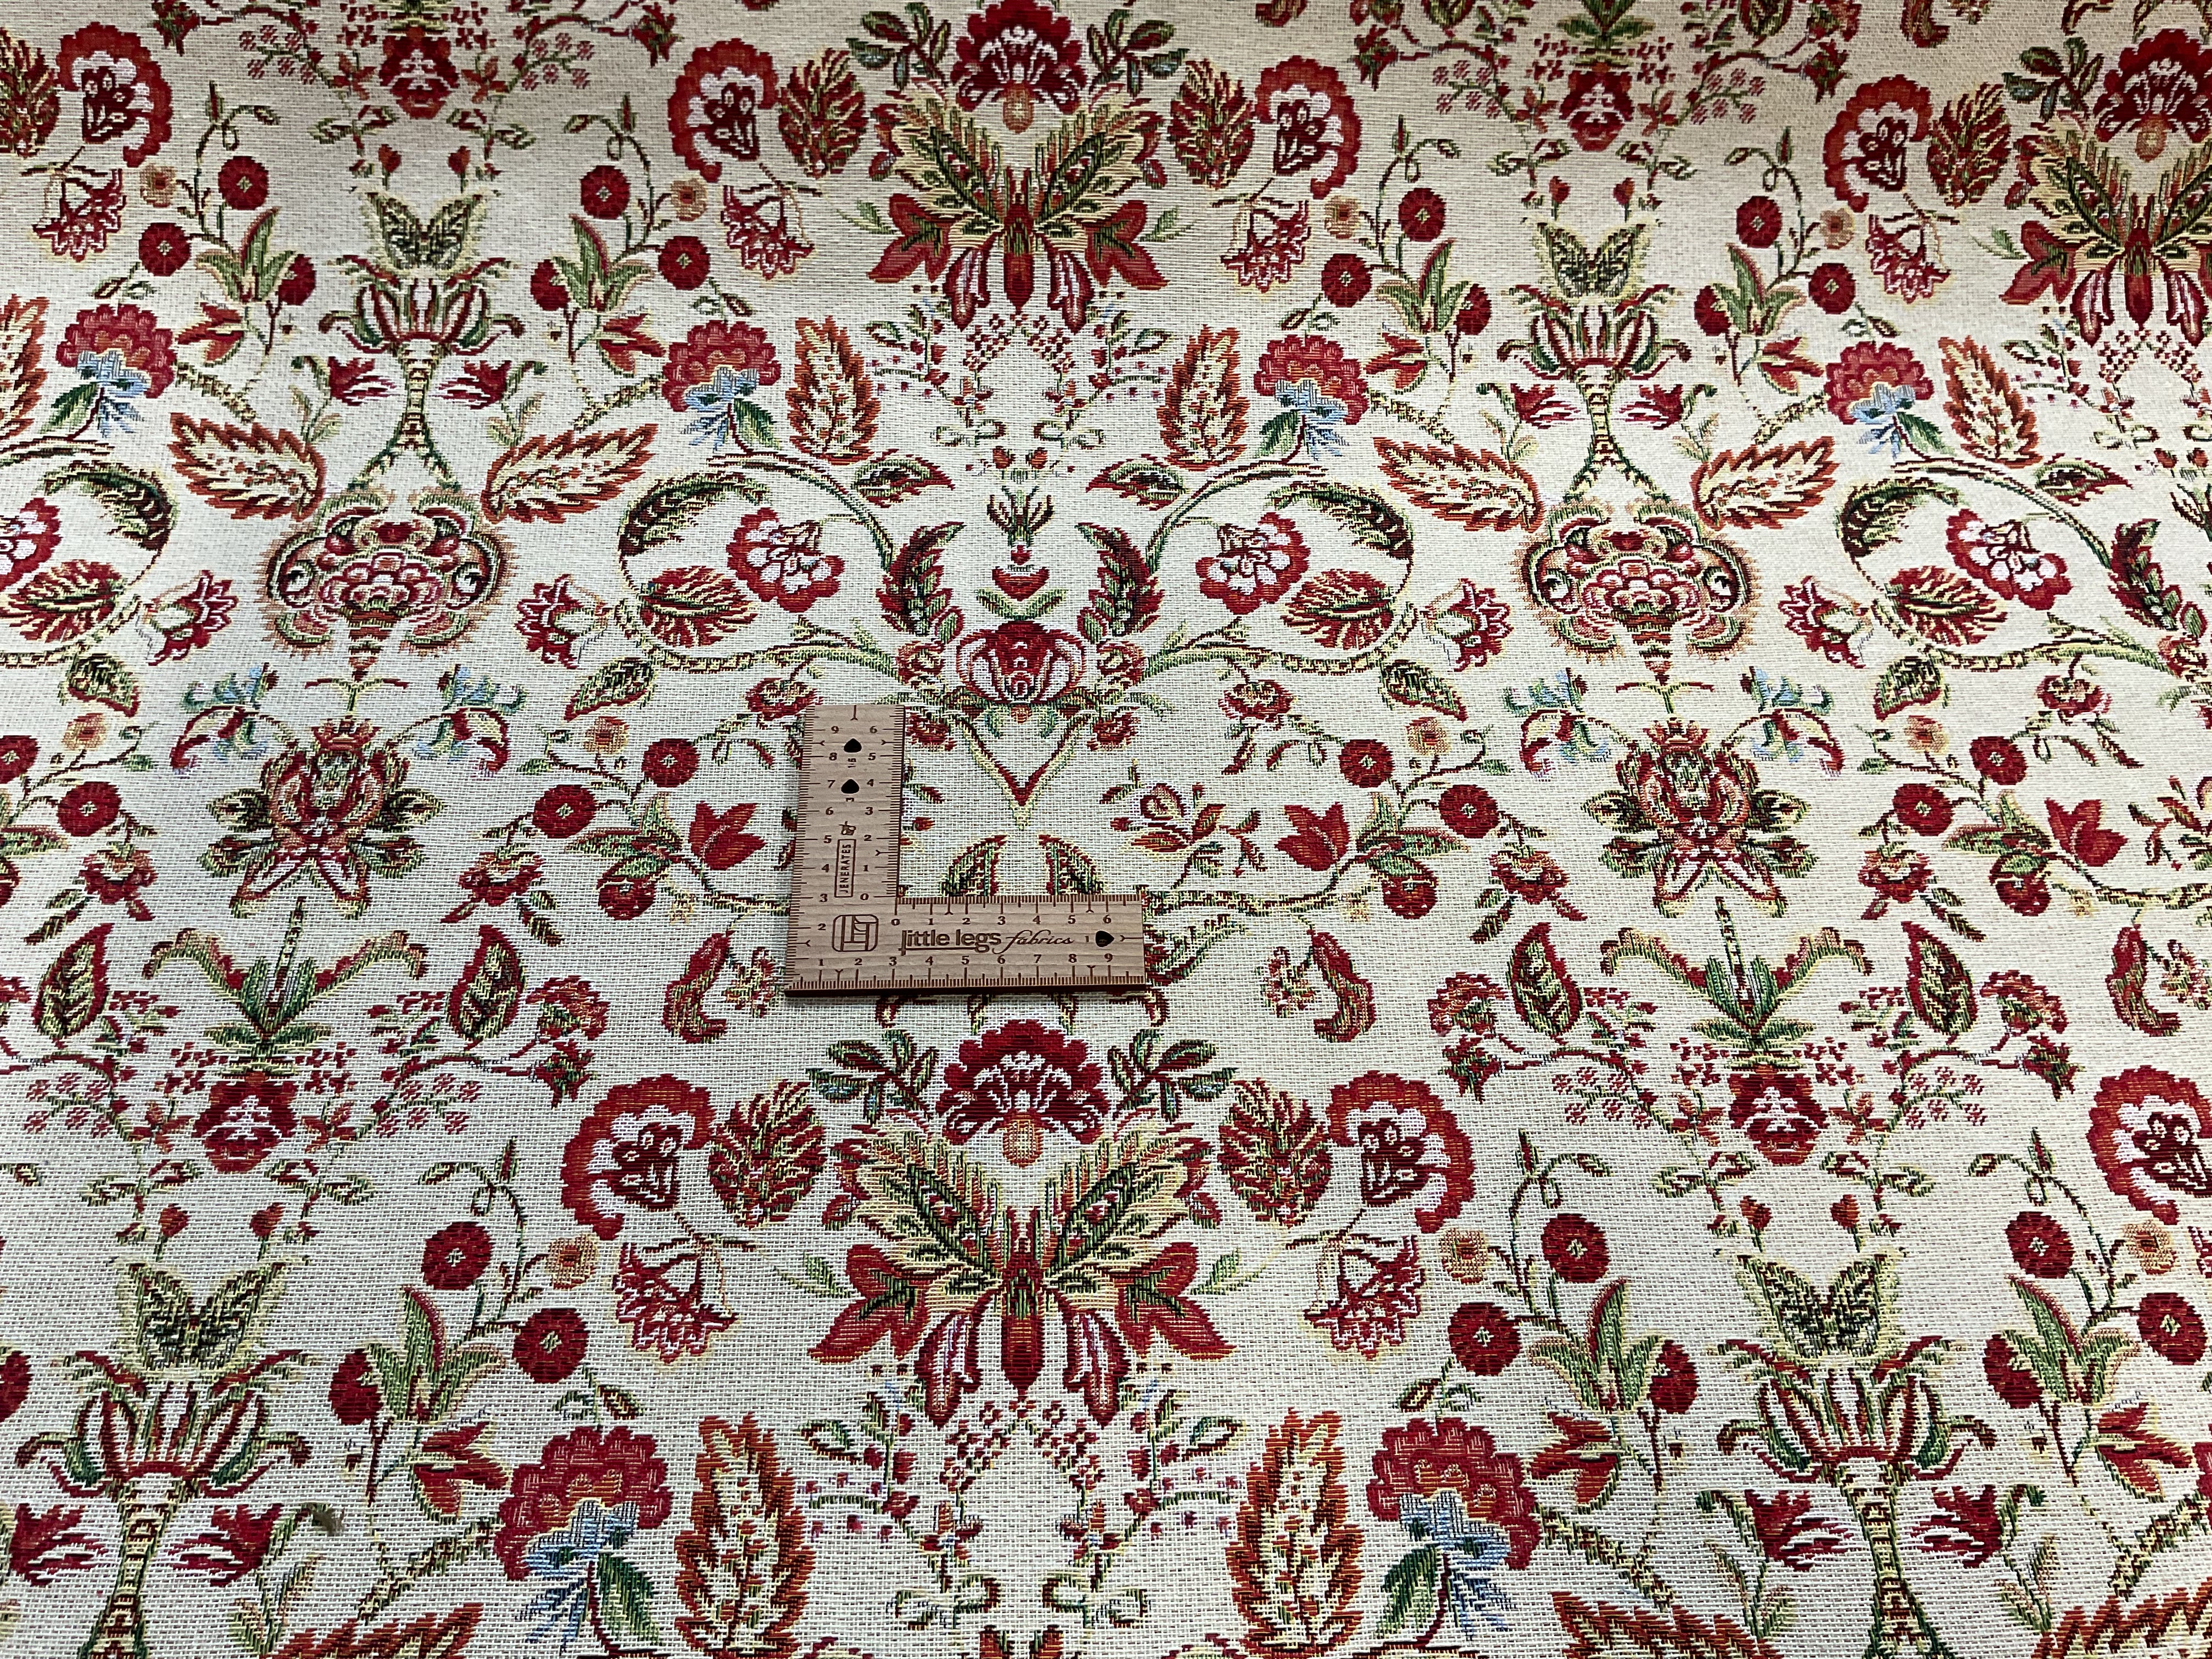 Vintage Floral Woven Tapestry